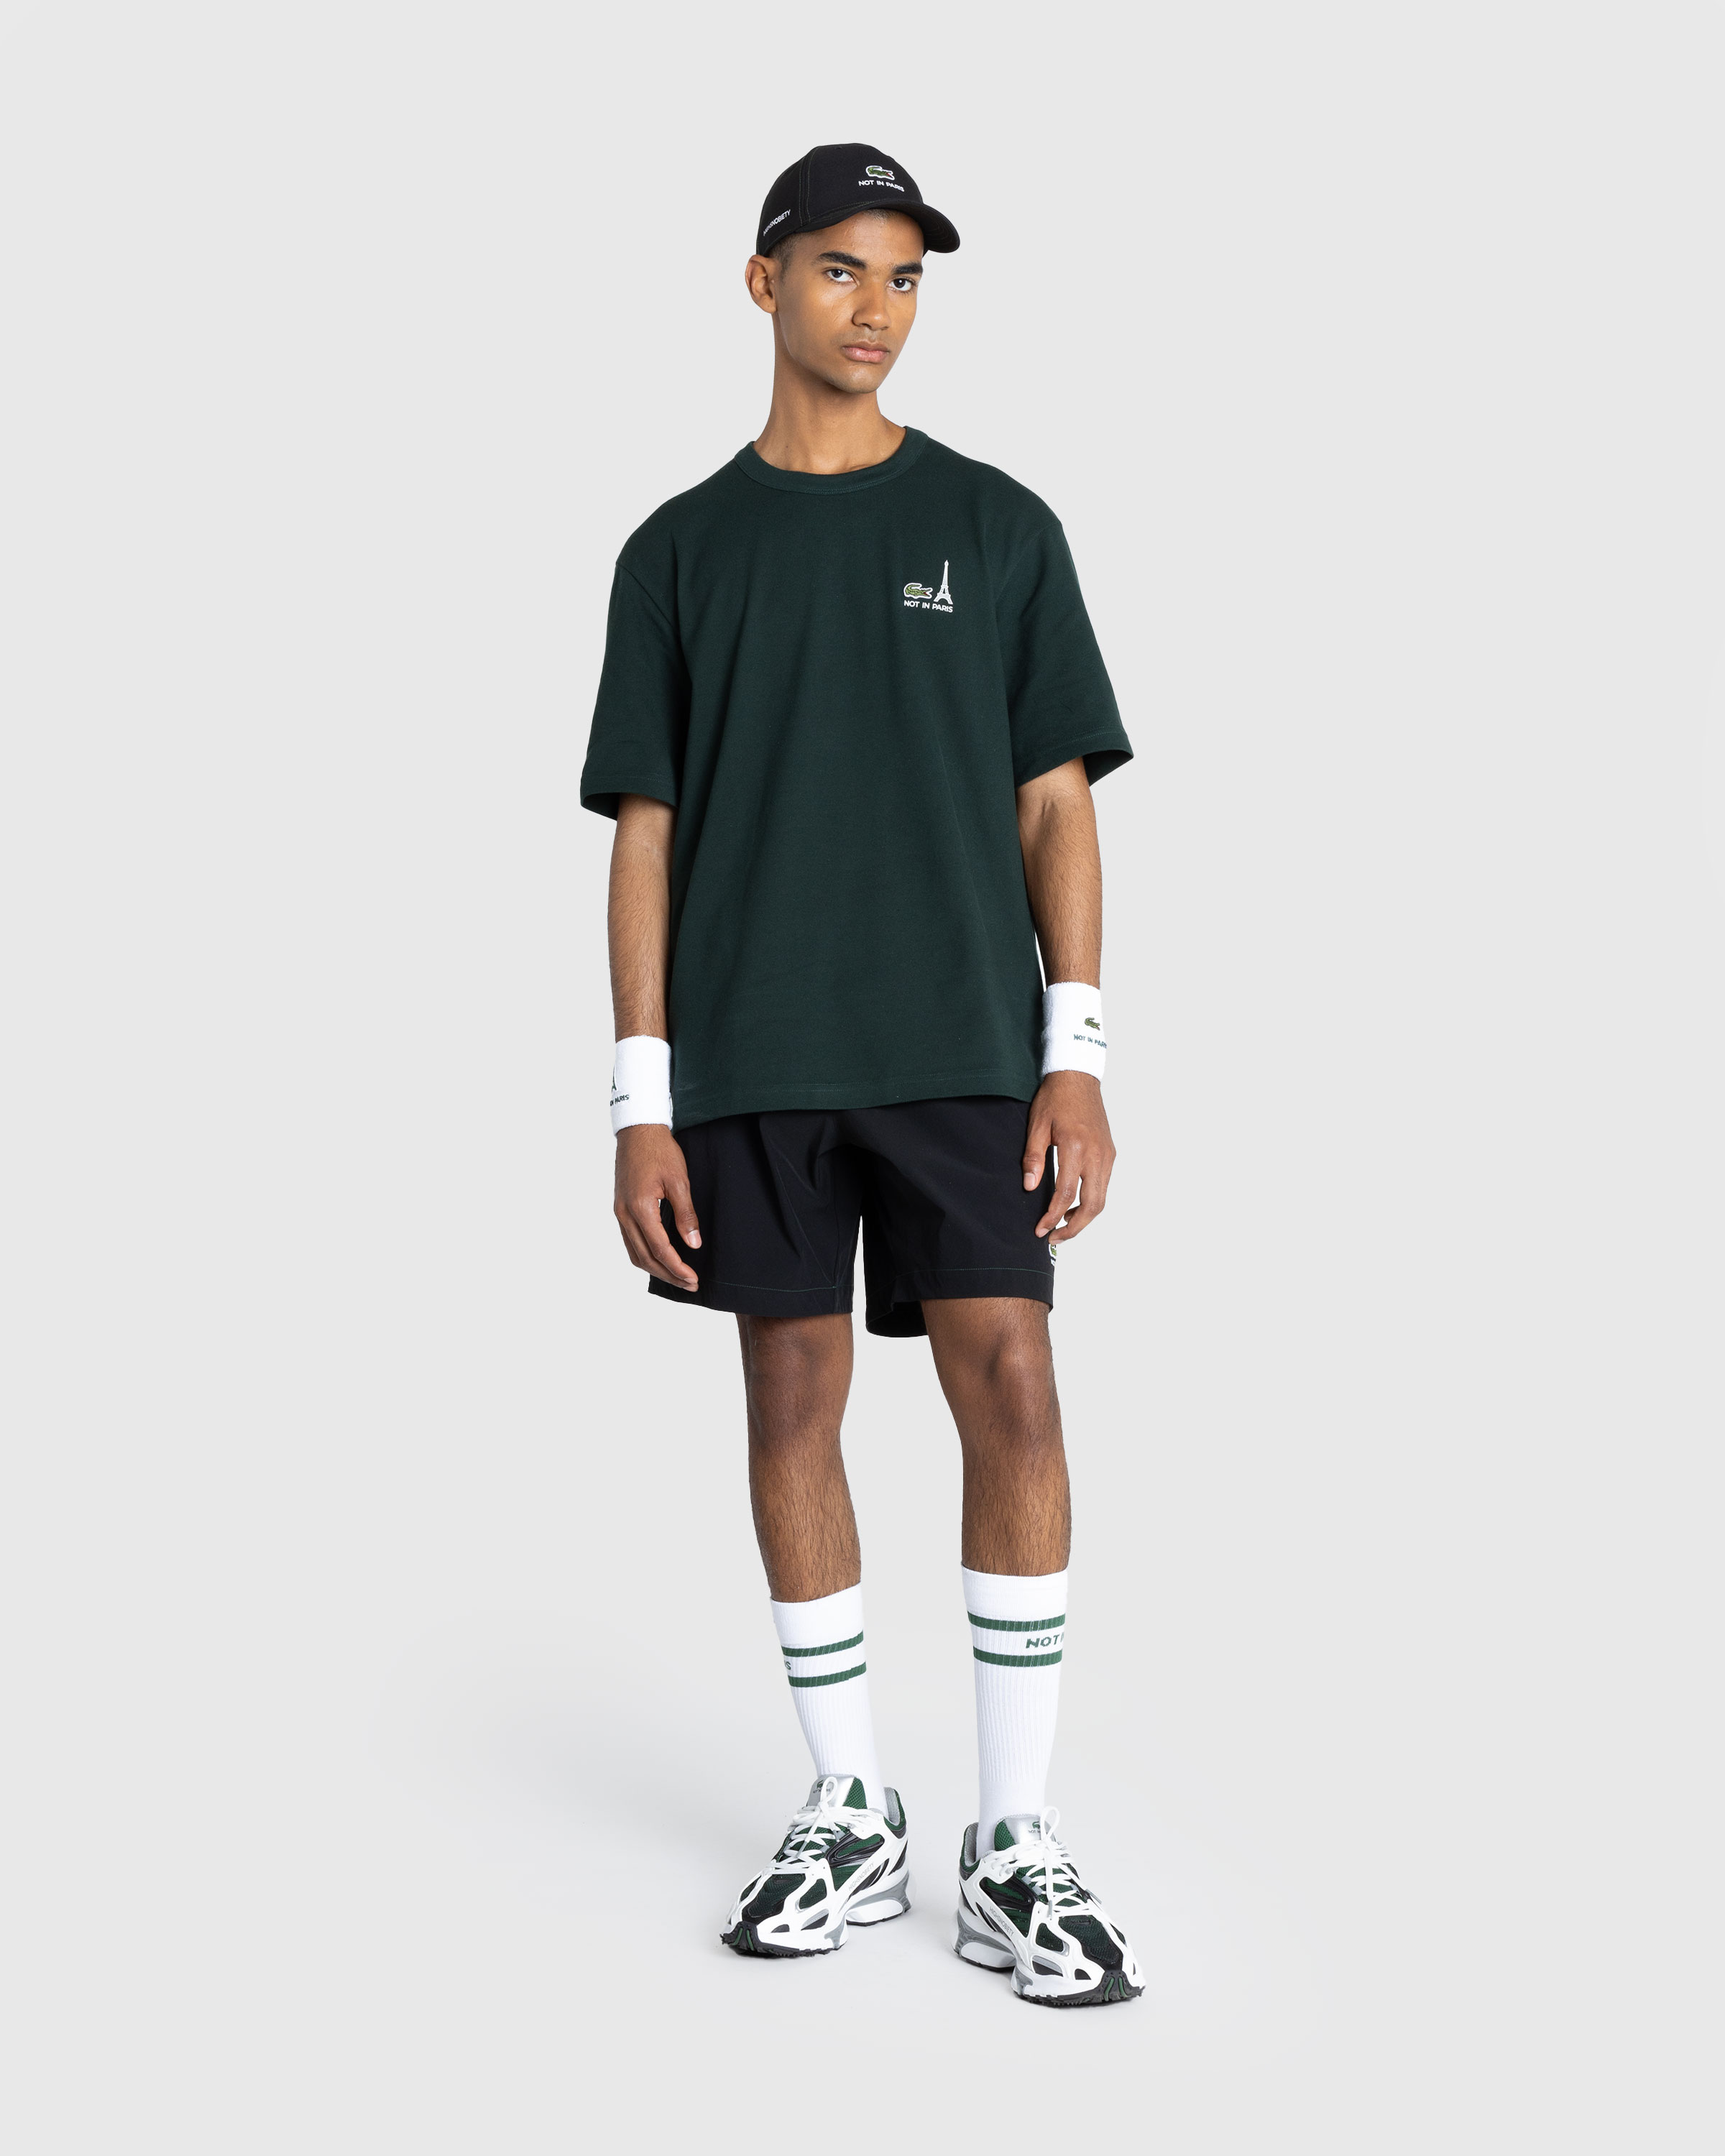 Lacoste x Highsnobiety – Not In Paris Tennis Shorts Black - Active Shorts - Sinople - Image 4